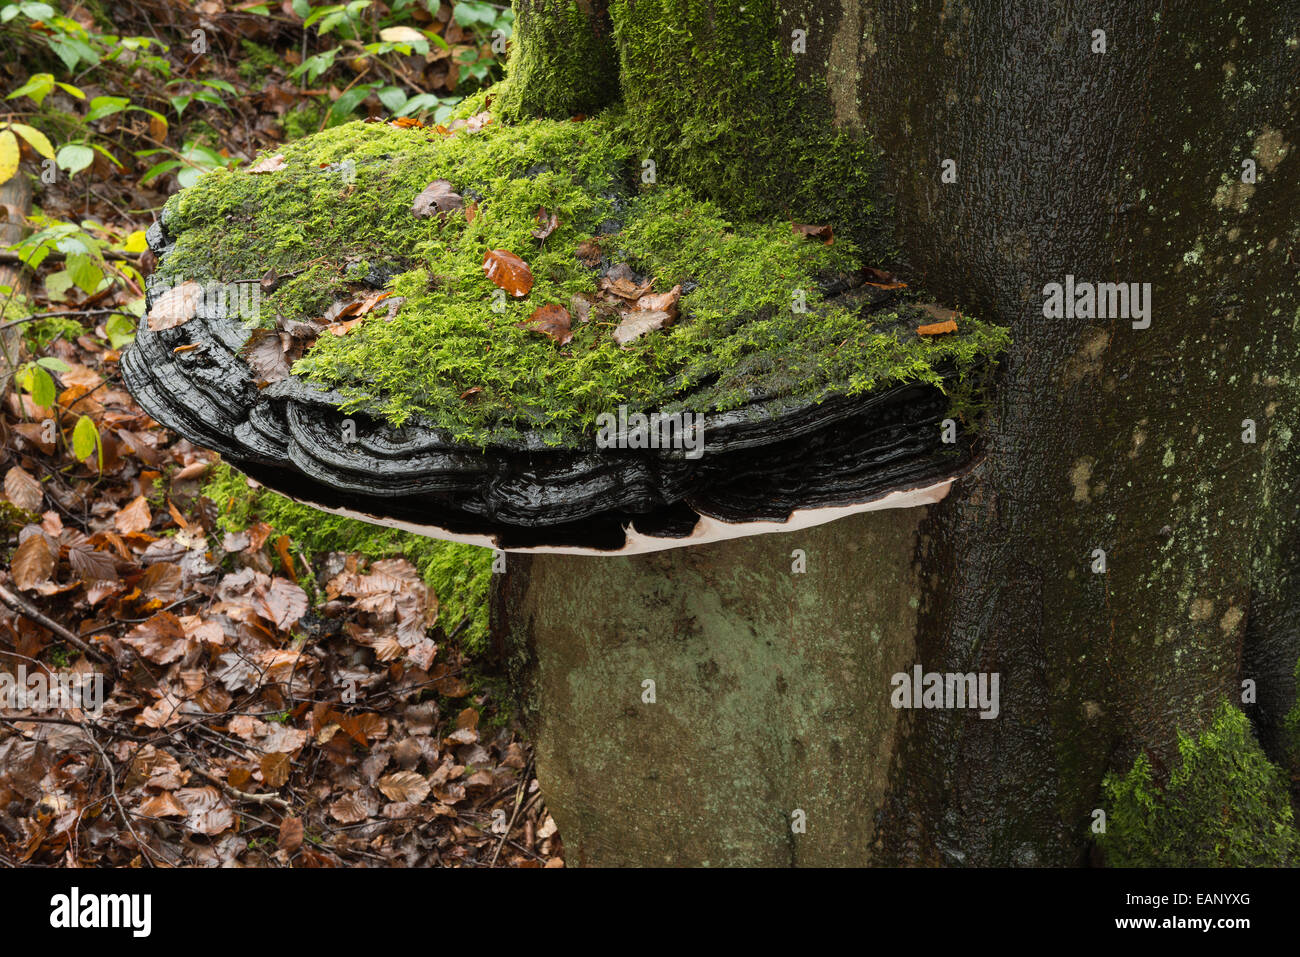 large bracket fungus over 50cm diameter on old living mature copper beech tree tree trunk base at ground level covered in moss Stock Photo